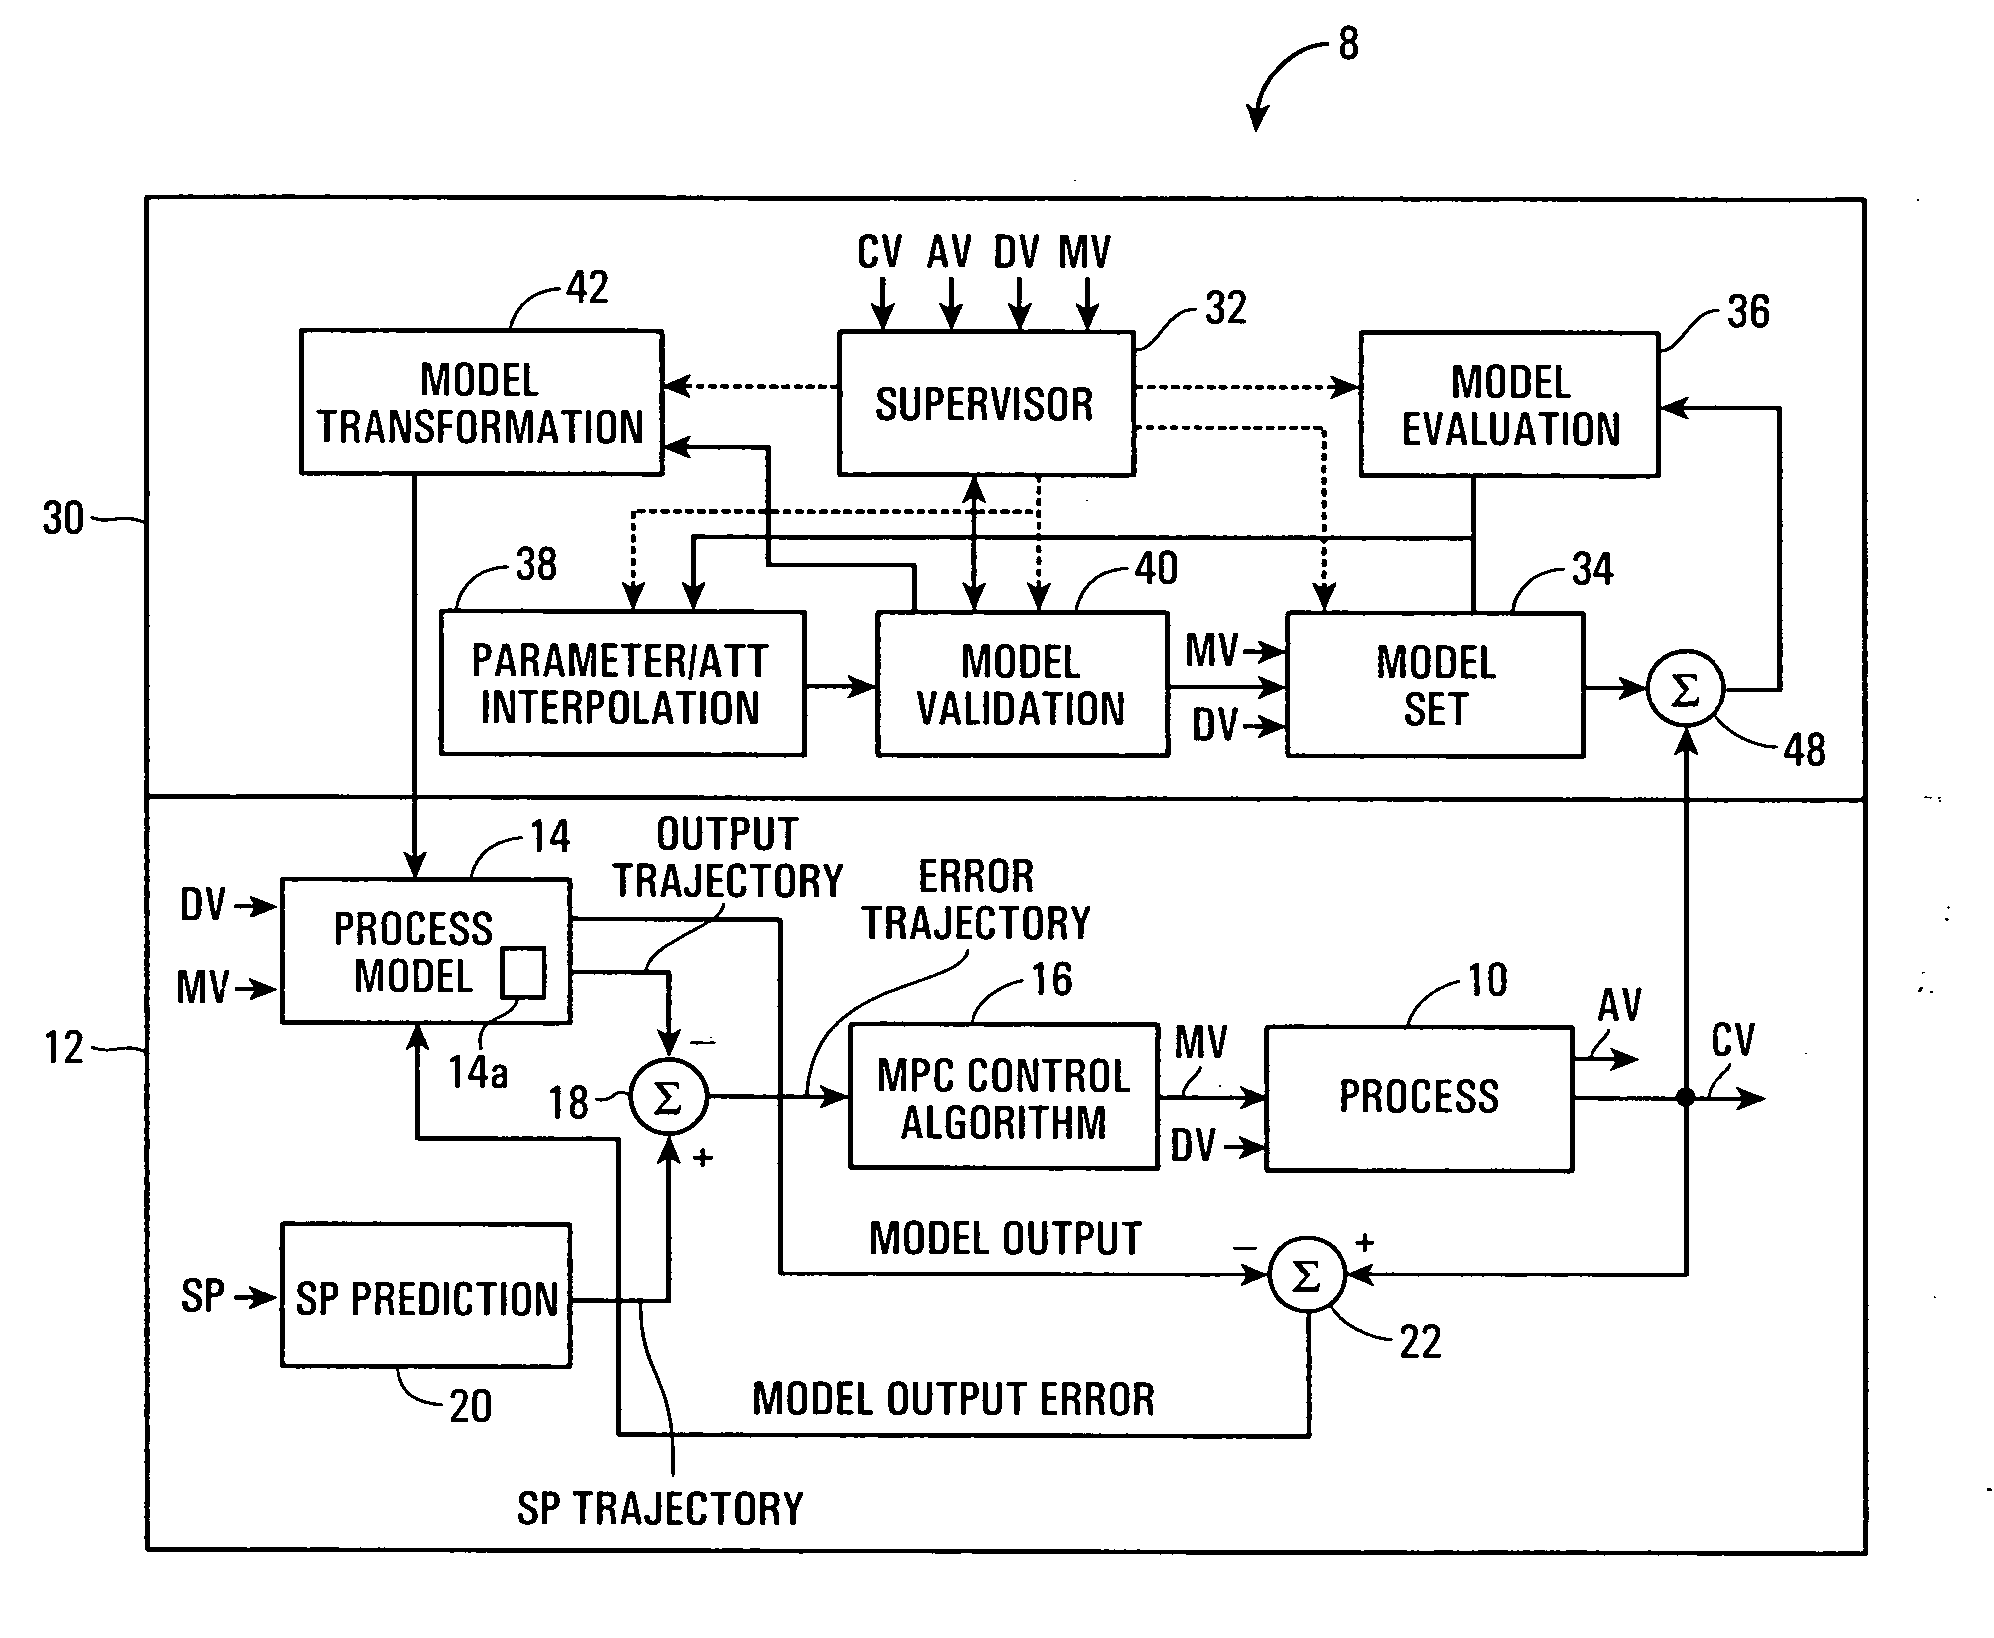 Adaptive multivariable process controller using model switching and attribute interpolation